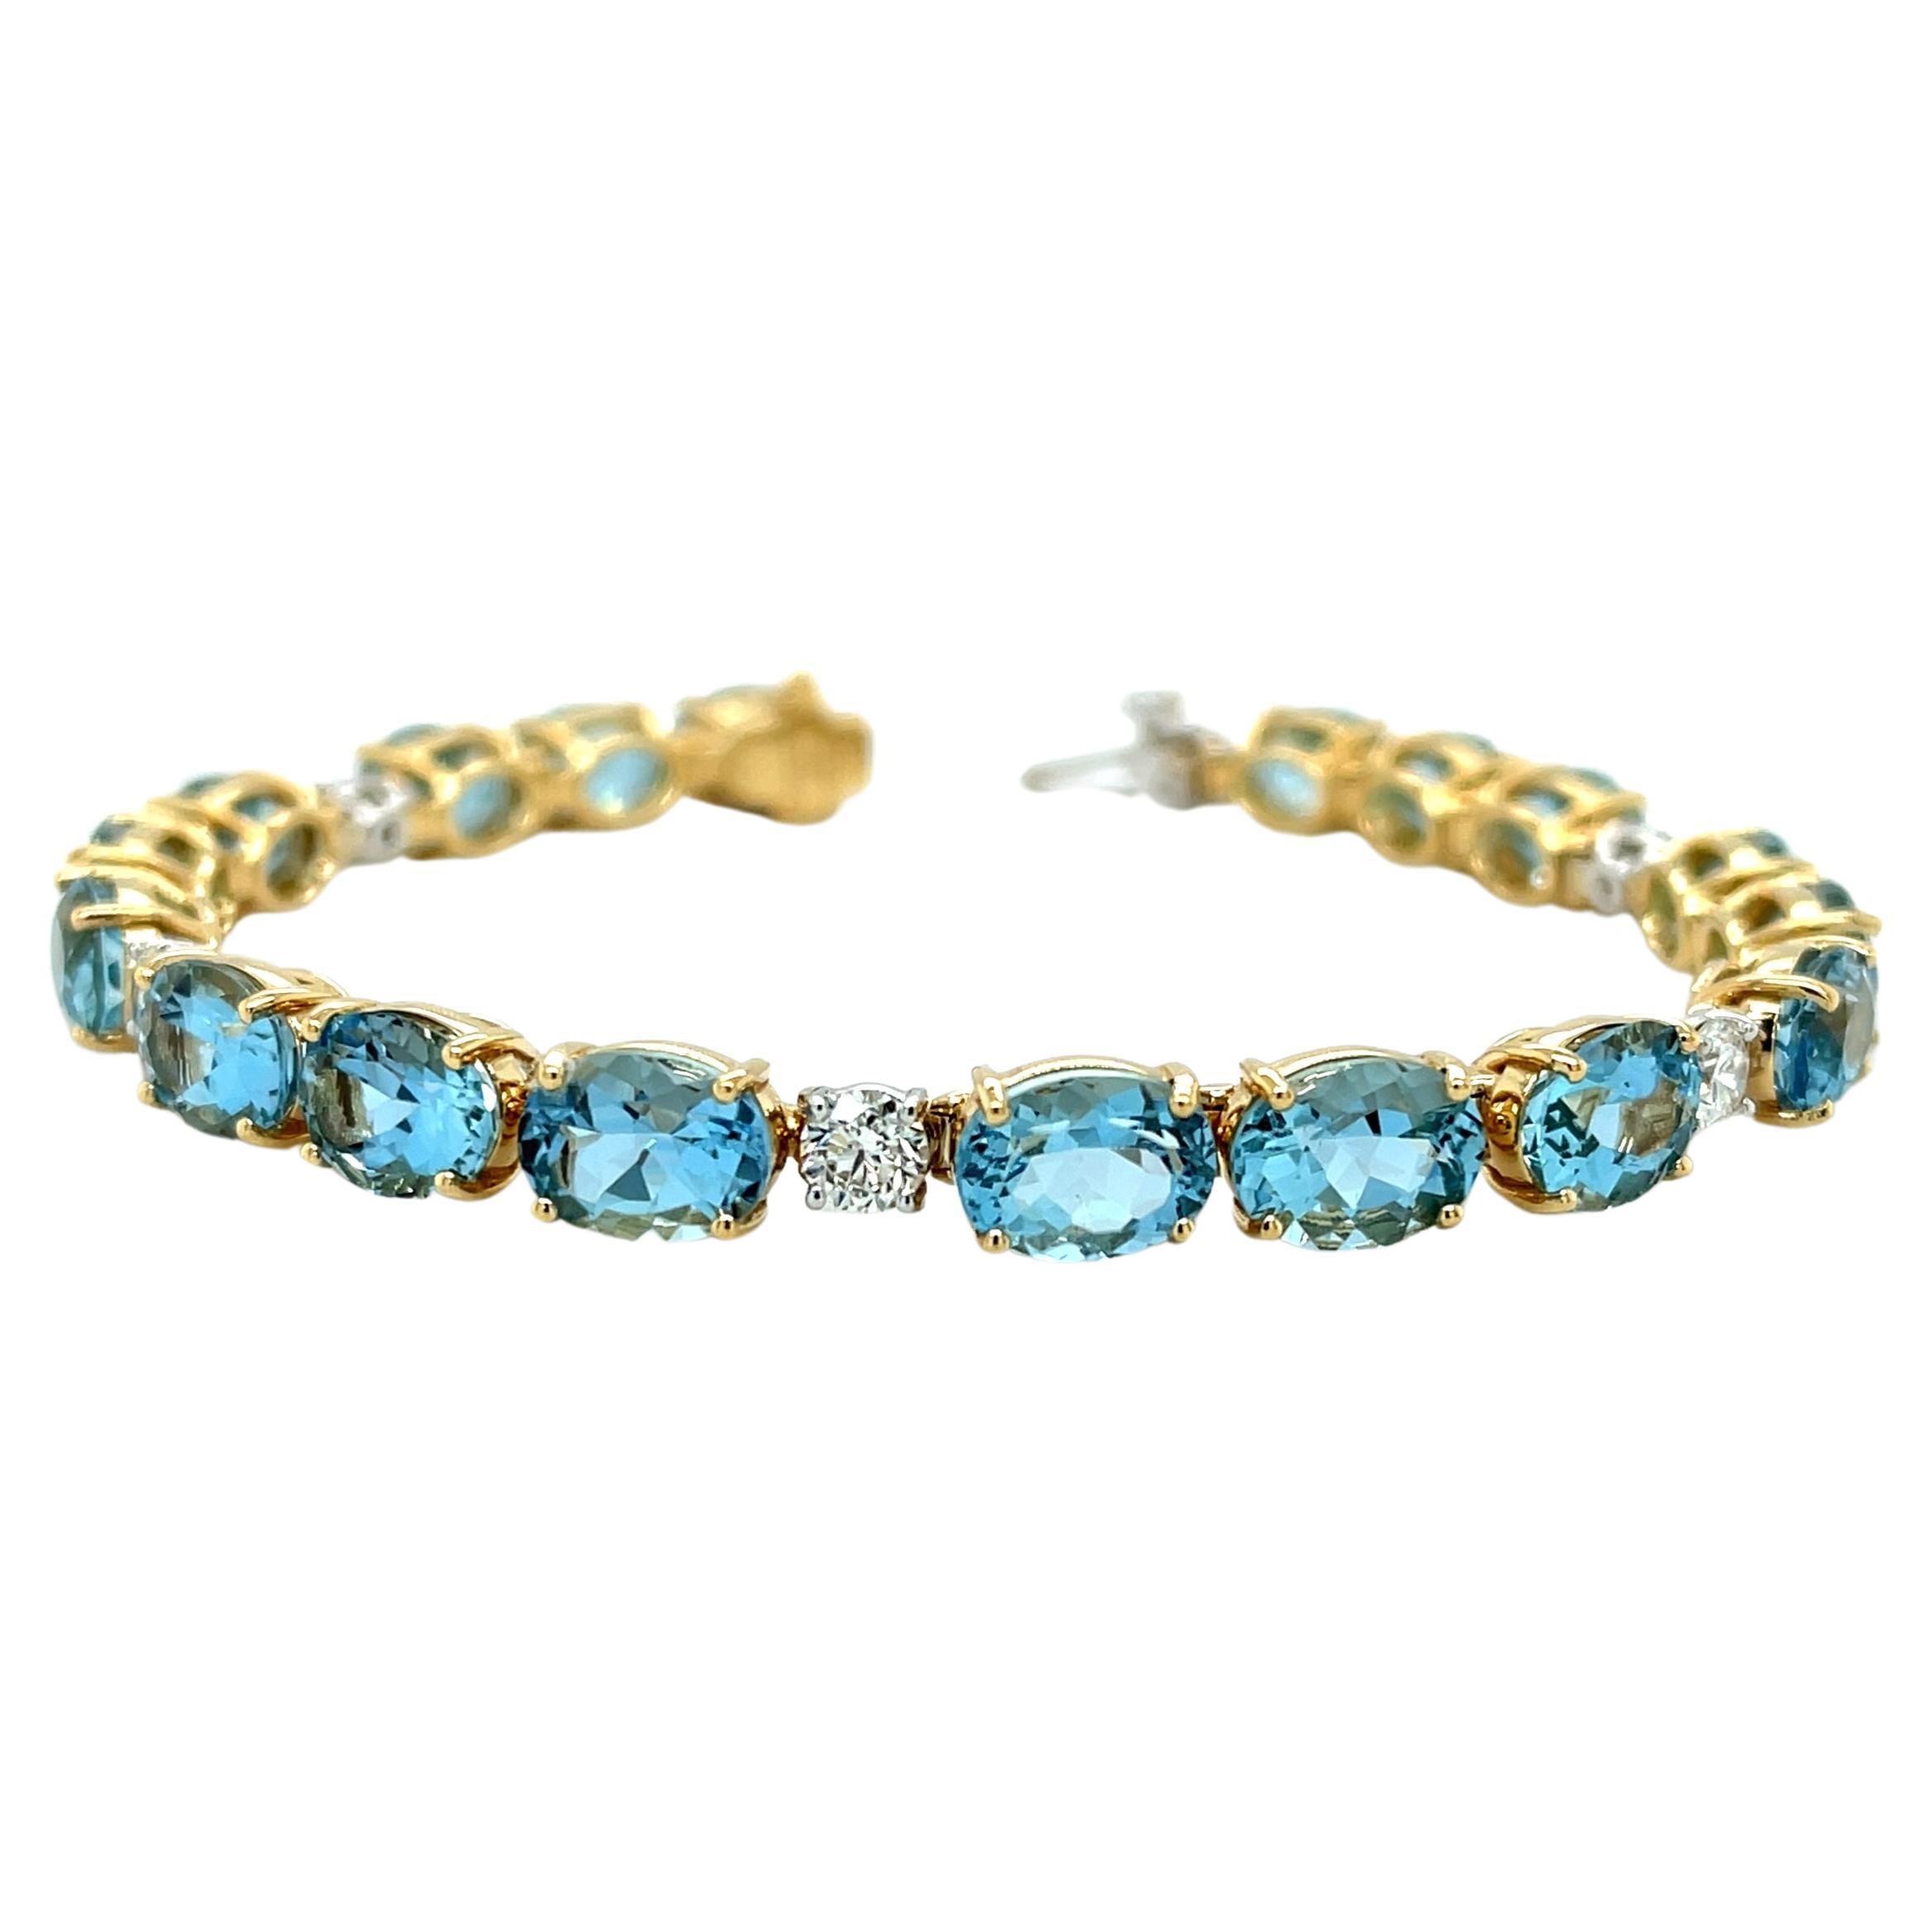 Aquamarine and Diamond Tennis Bracelet in 18k Gold, 20.99 Carats Total For Sale